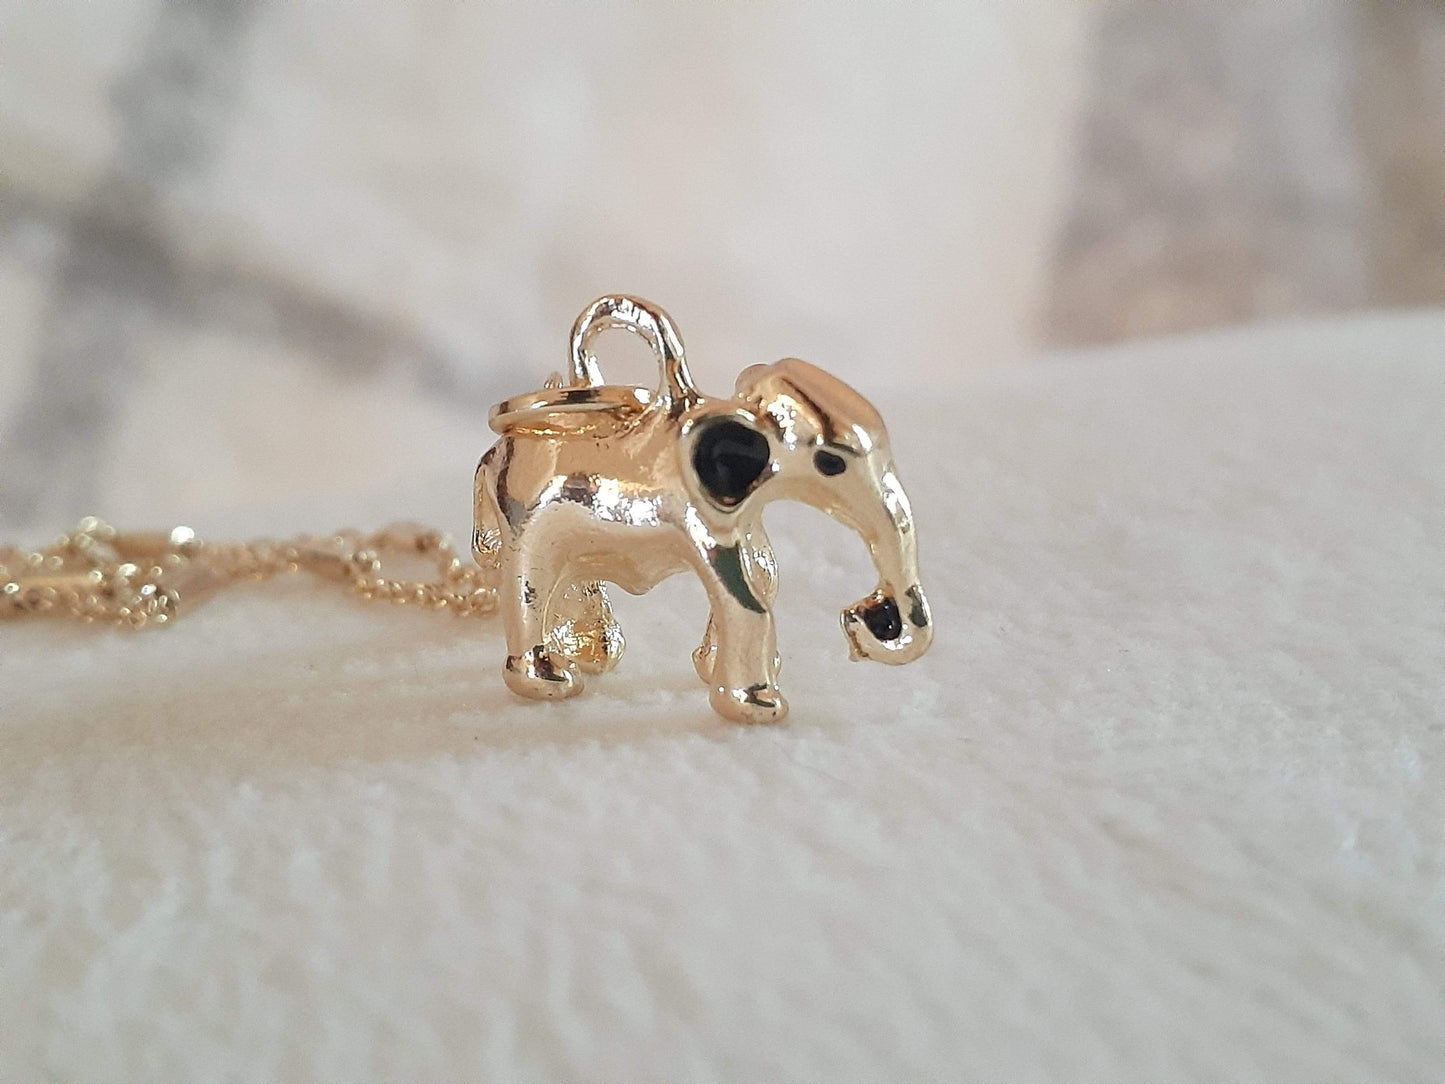 Gold Plated Elephant Necklace - Beautiful Petite Elephant Necklace (14 in)